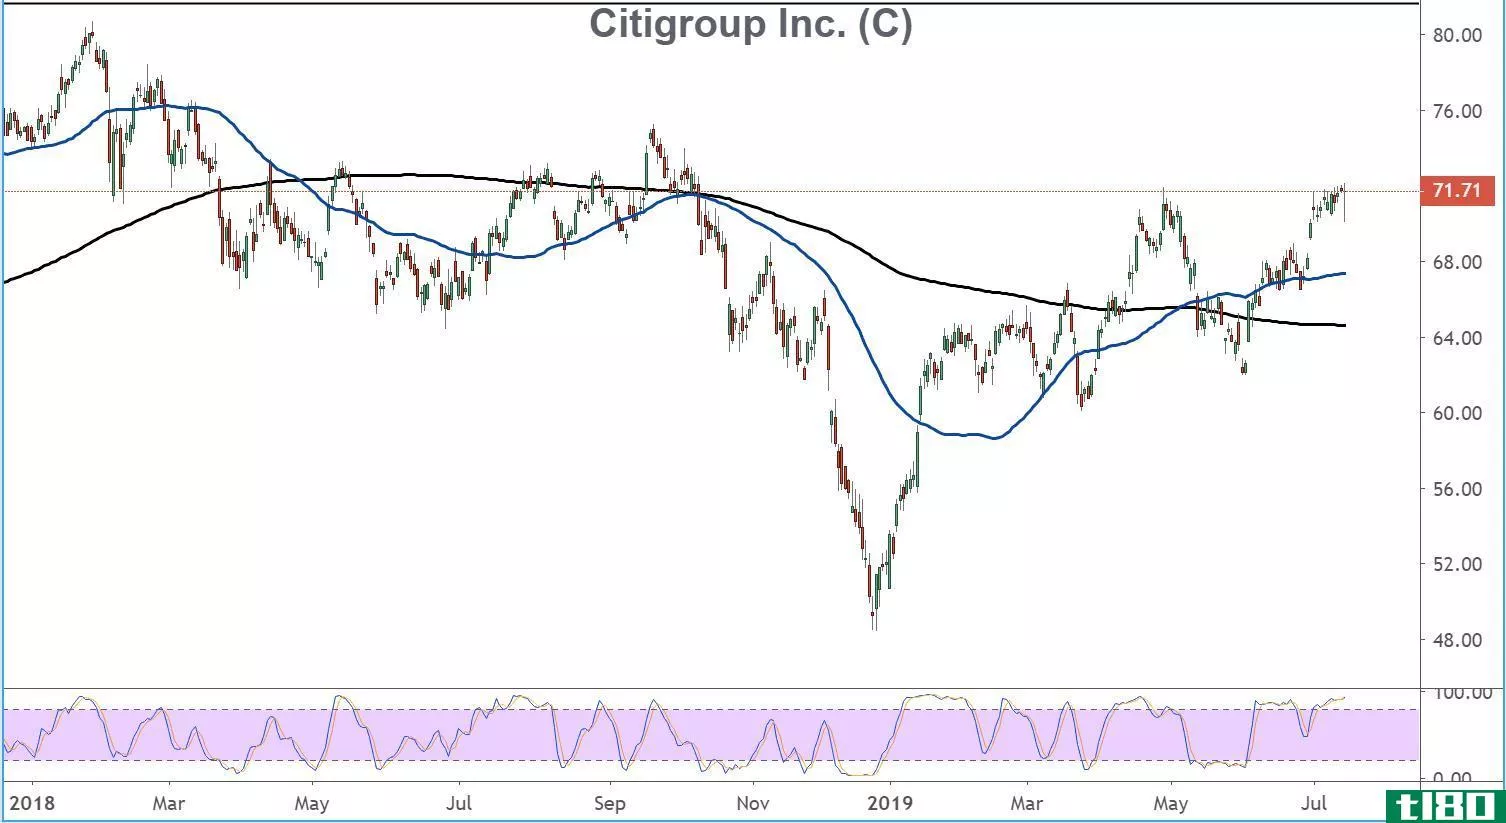 Chart showing the performance of Citigroup Inc. (C)